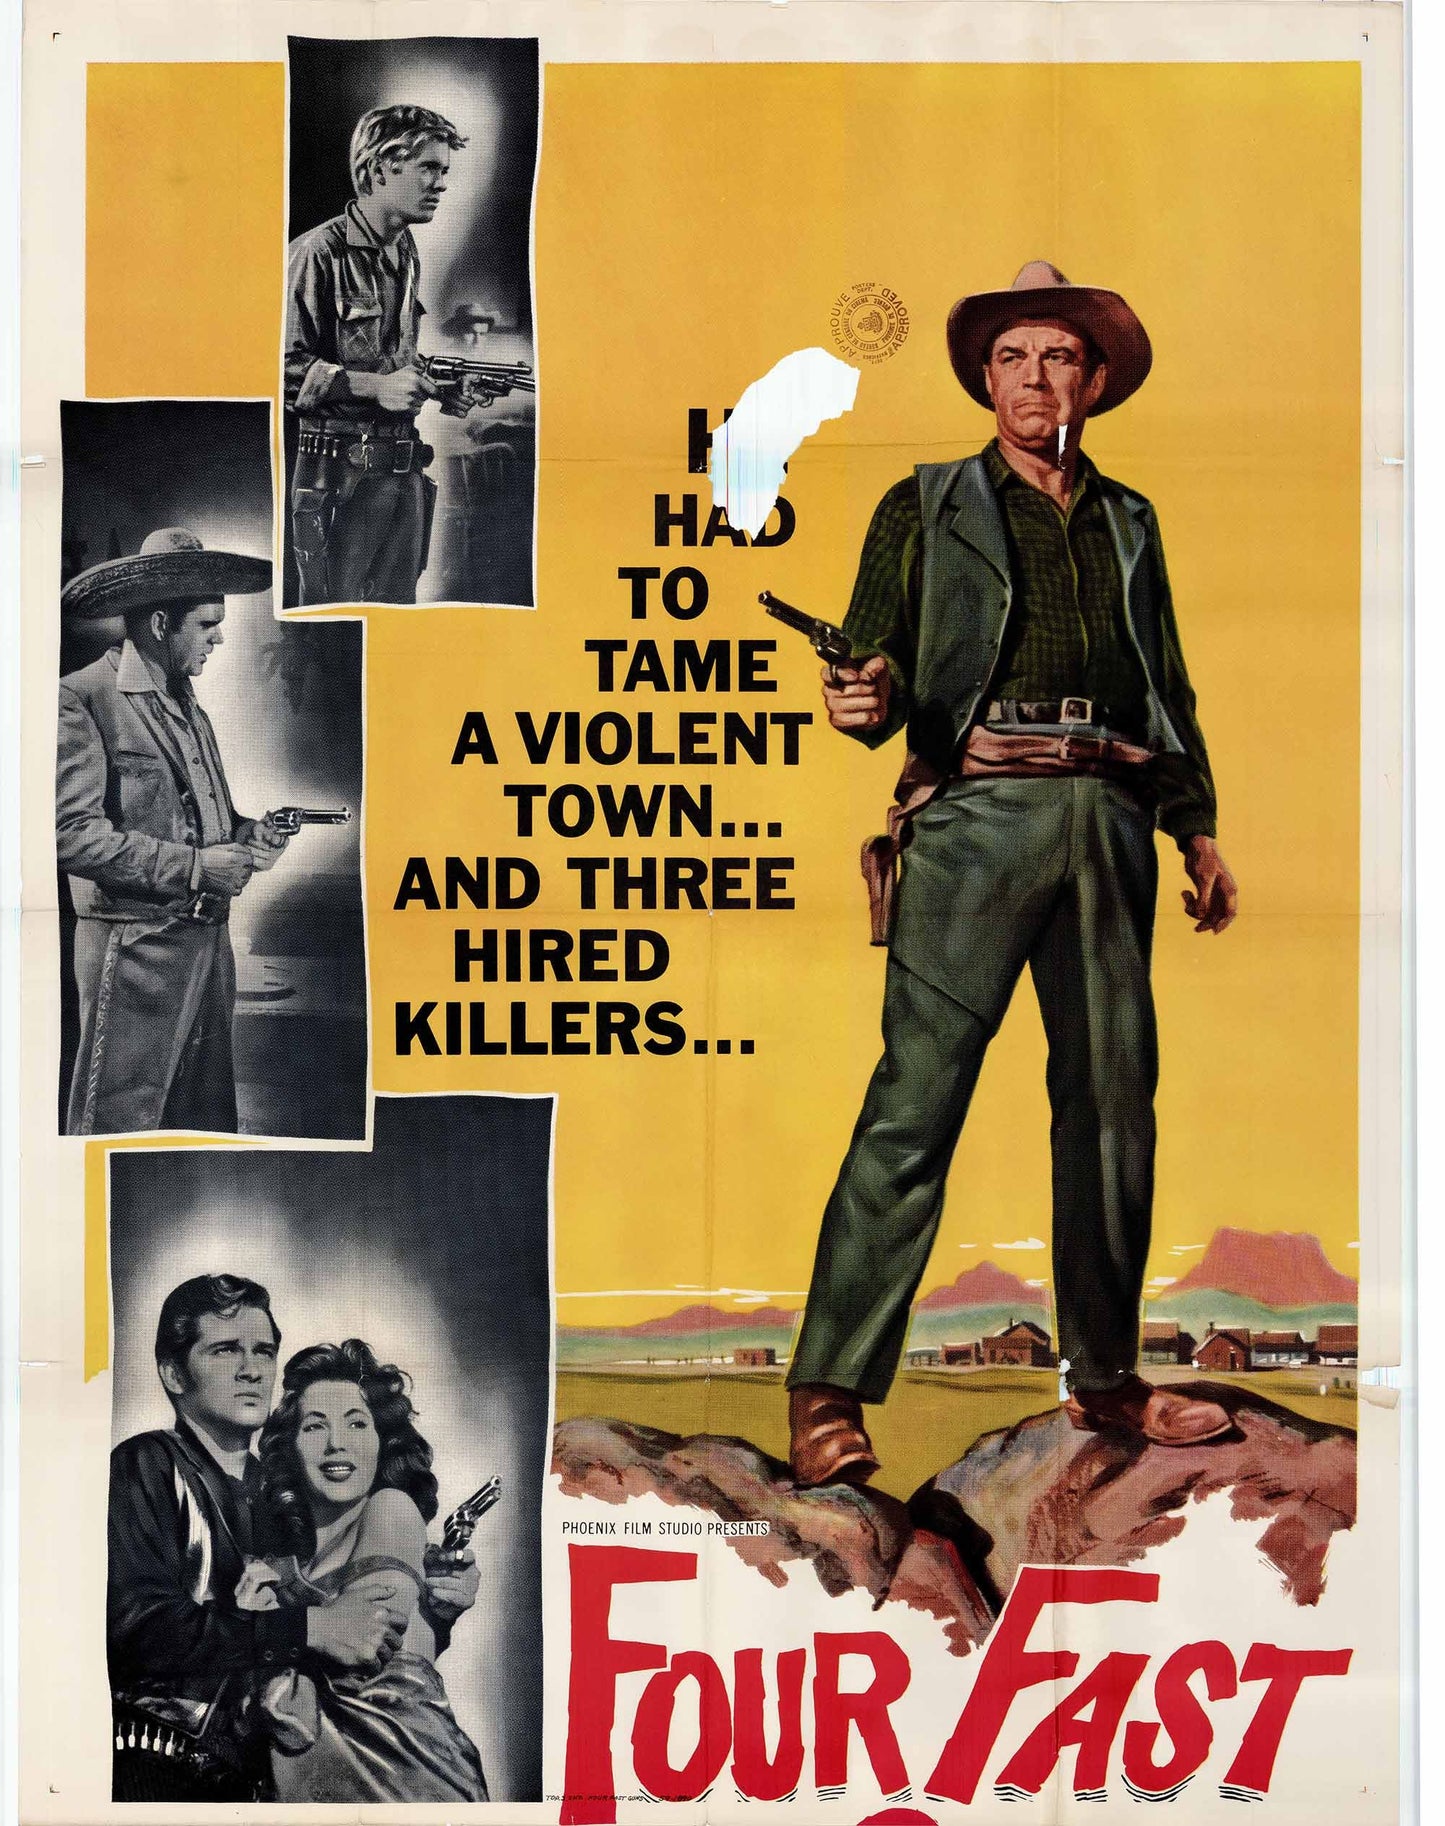 Four Fast Guns - Classic 2 Panel Movie Poster